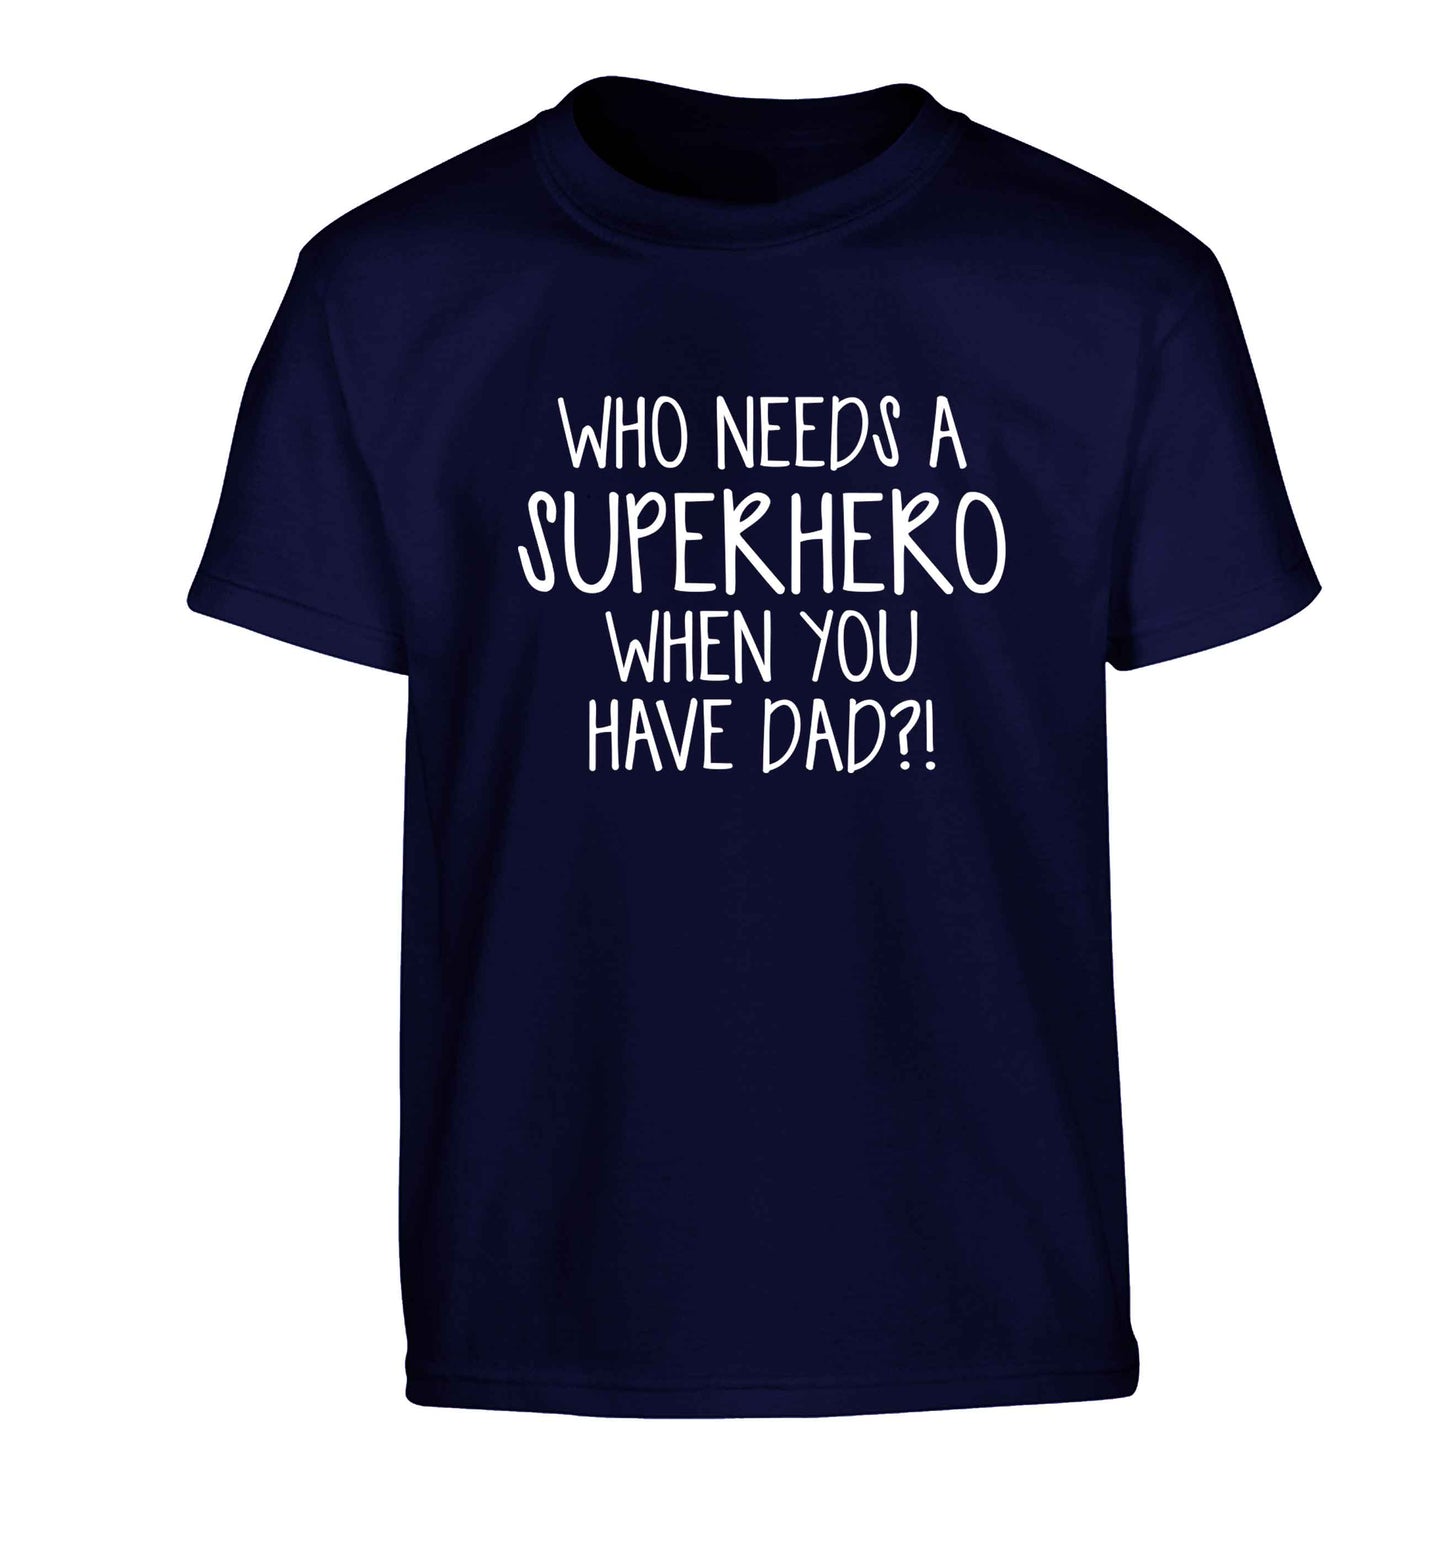 Who needs a superhero when you have dad! Children's navy Tshirt 12-13 Years